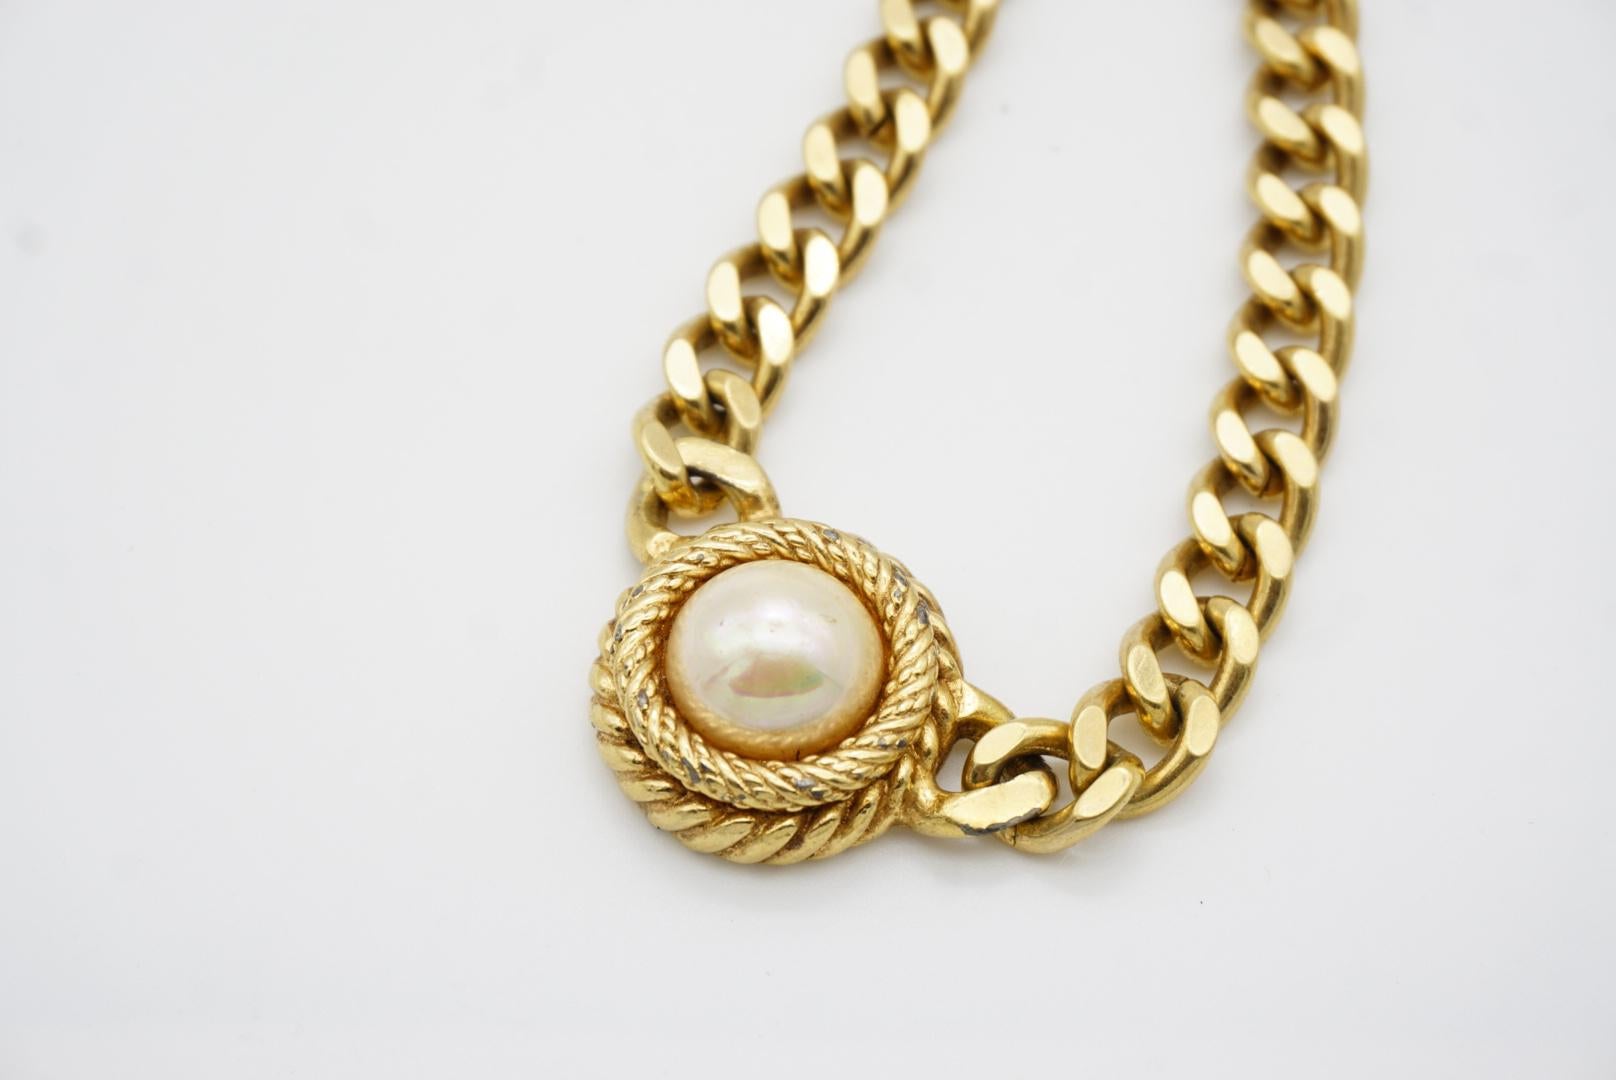 Christian Dior Vintage 1980s White Pearl Cabochon Pendant Curb Link Necklace For Sale 5